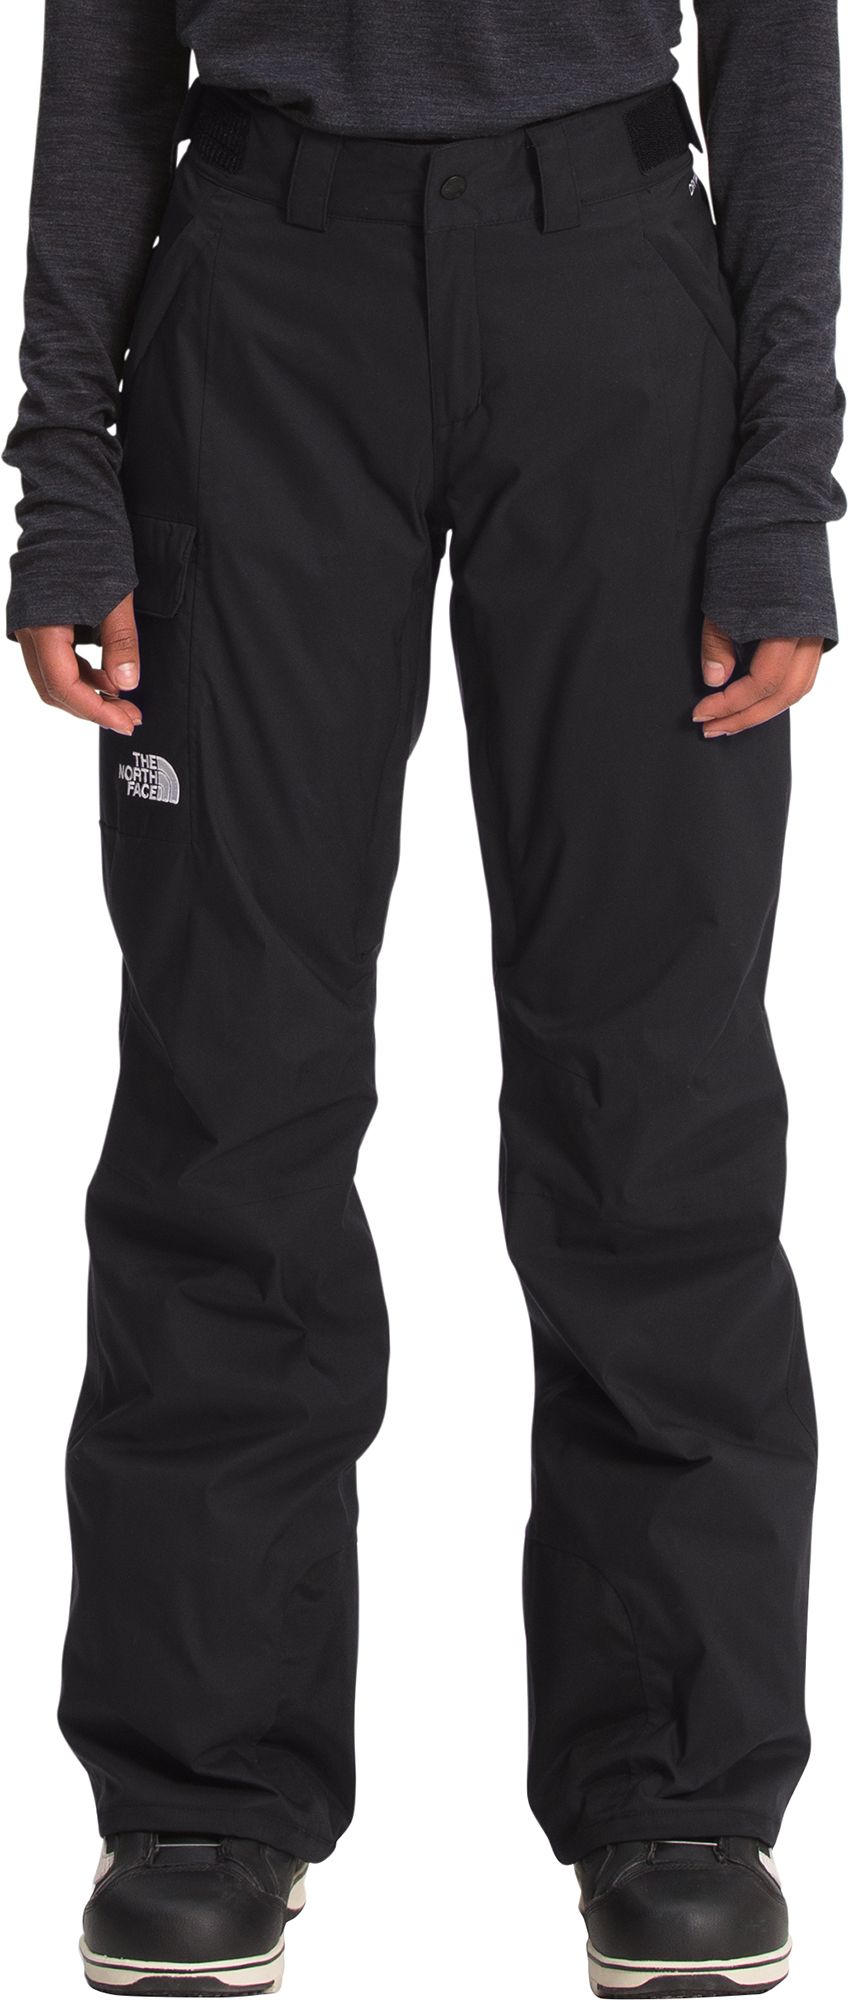 Photos - Ski Wear The North Face Women's Freedom Insulated Snow Pants, Large, TNF Black 21TN 